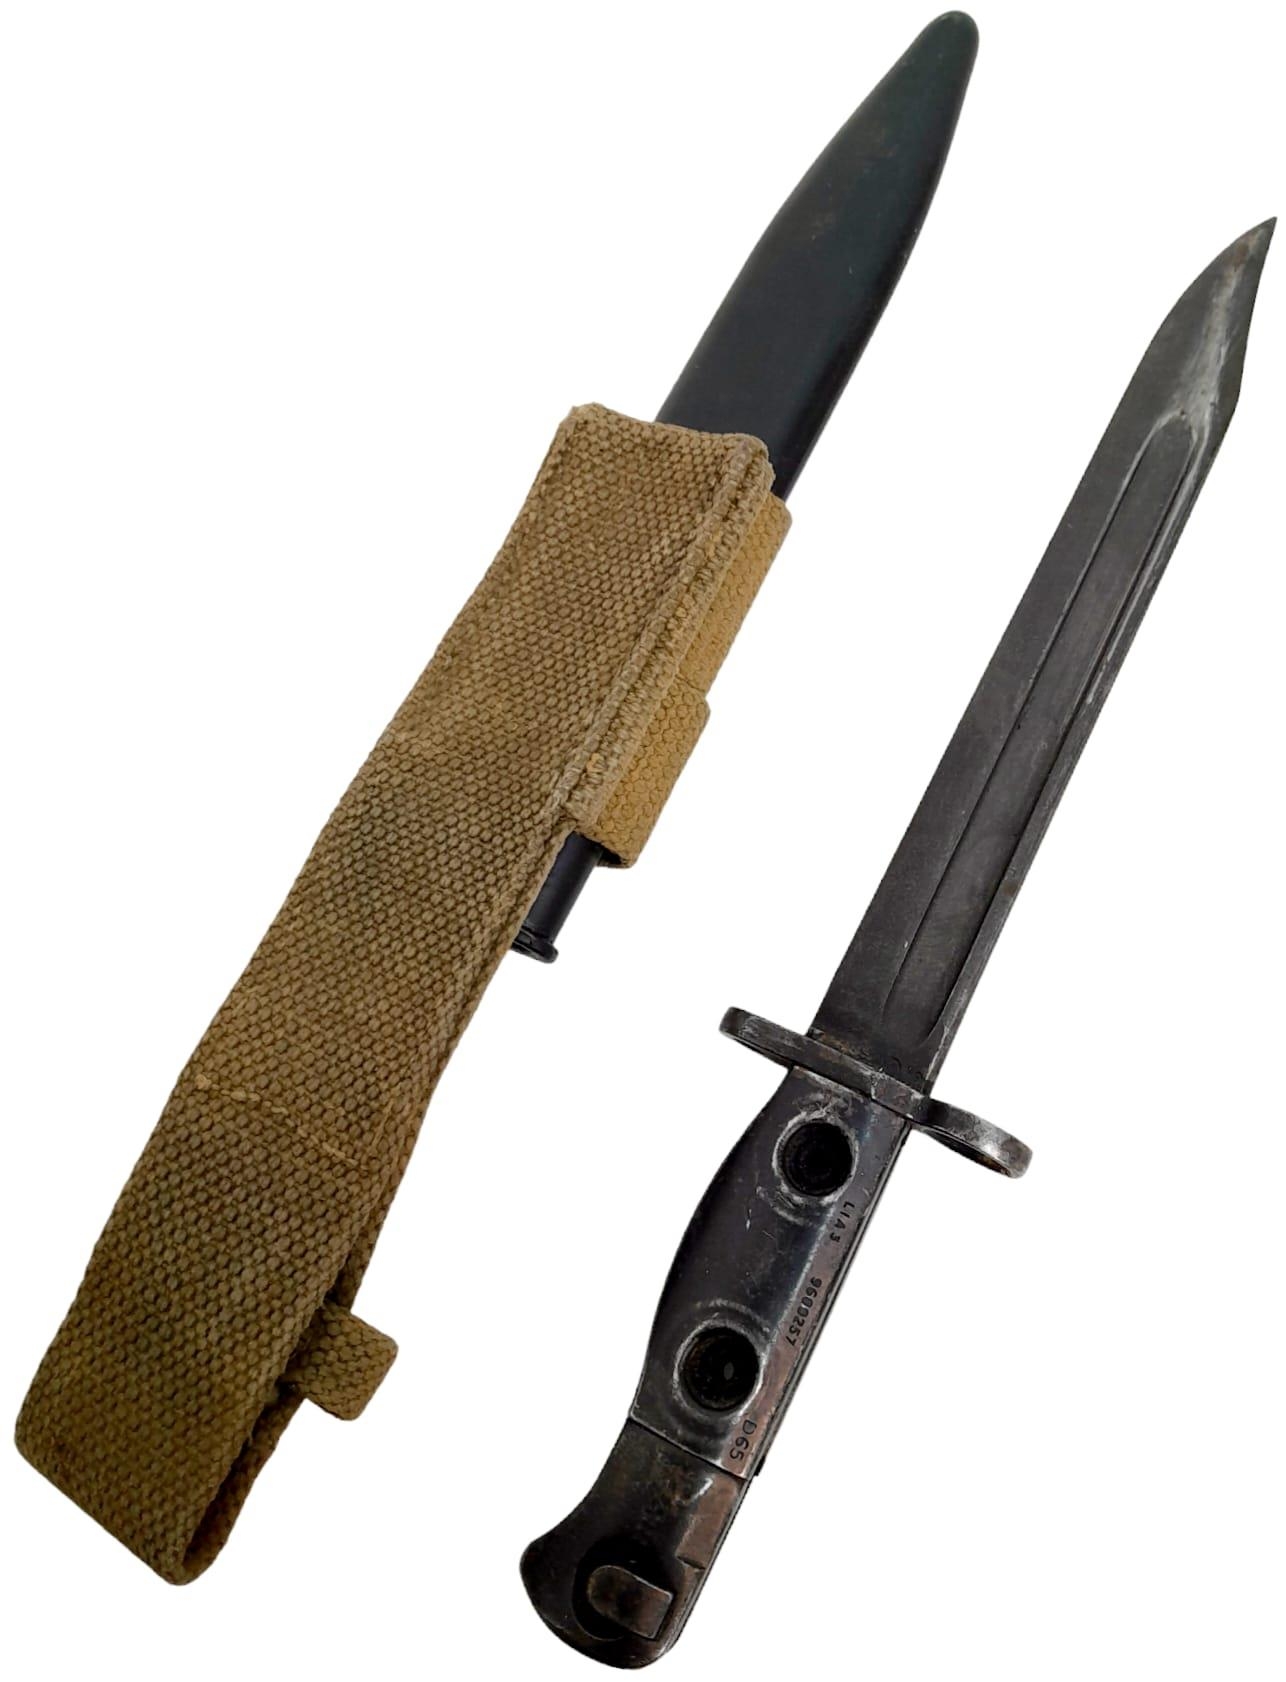 Cold War Period British L1-A3 SLR Bayonet & Frog. Dated 1965. - Image 3 of 4